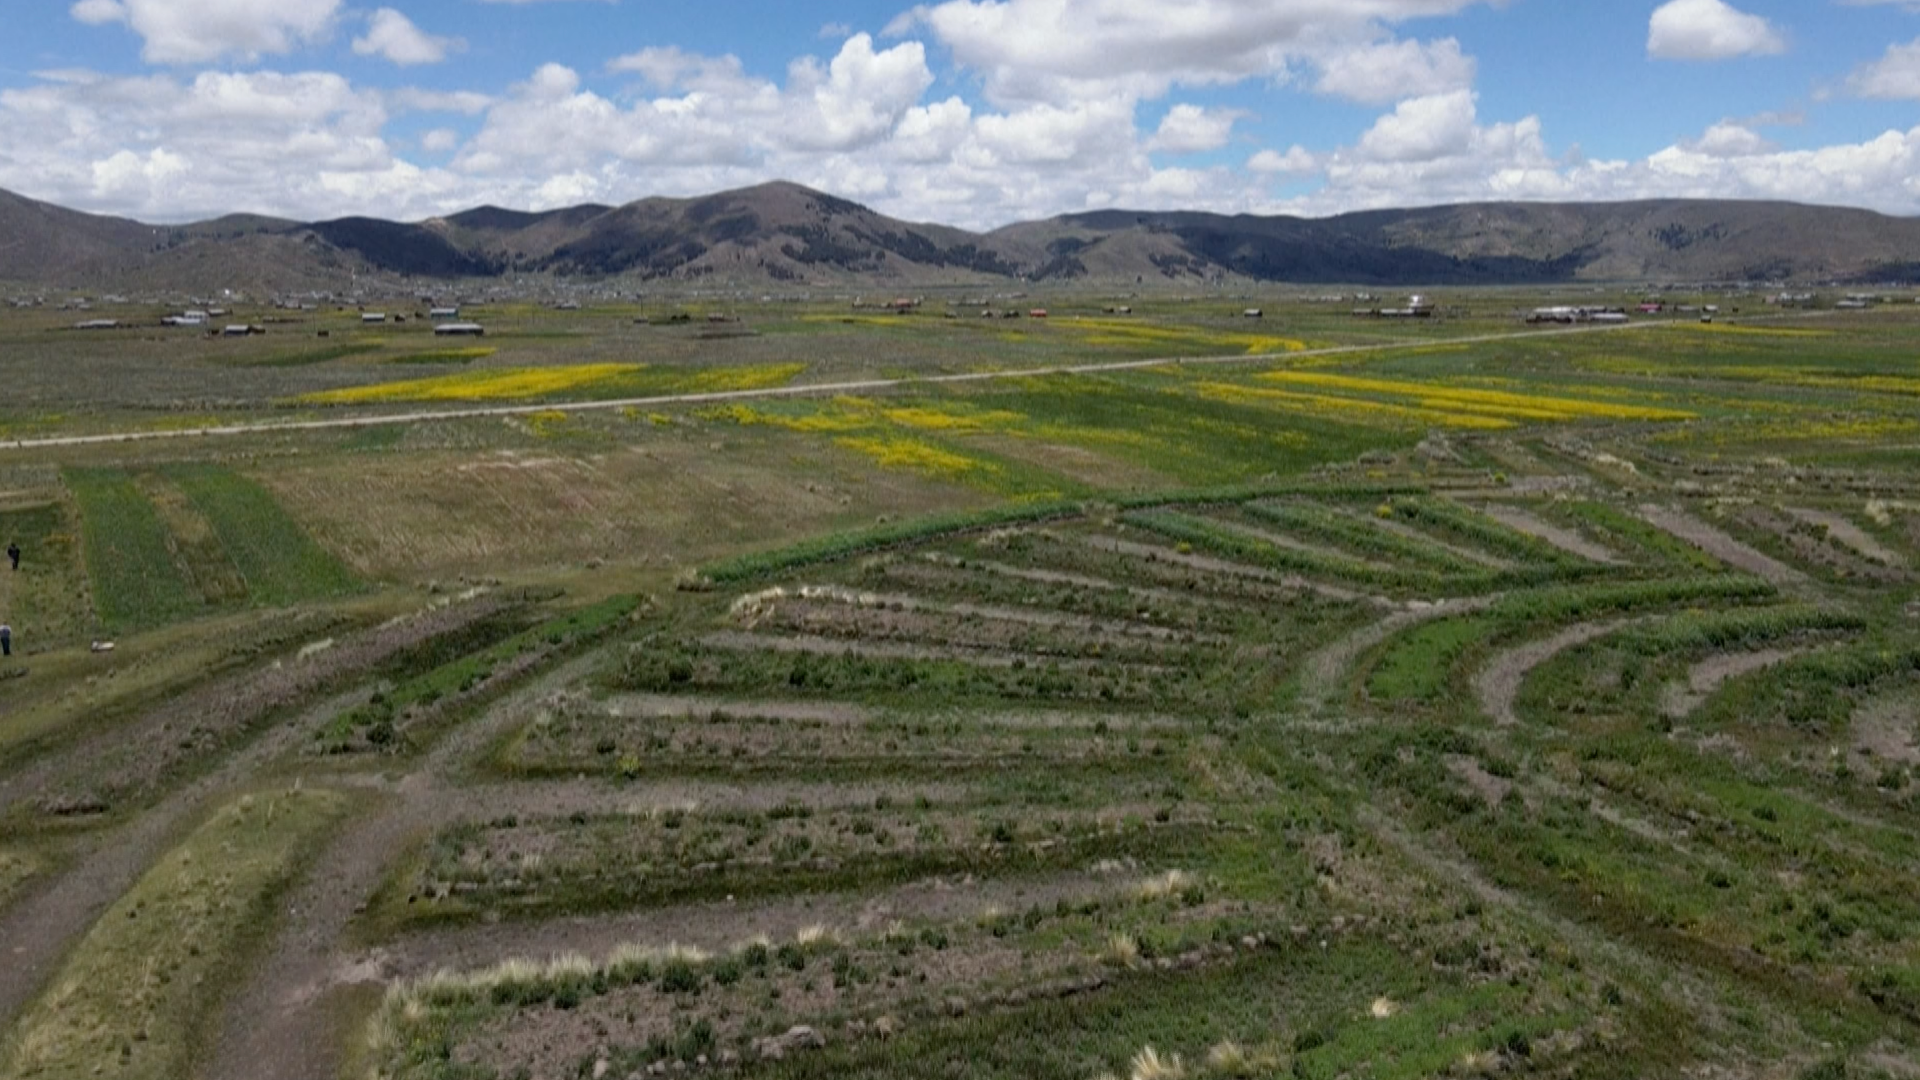 Farmers in the Andes Resort to Ancient Methods in Response to Climate Change